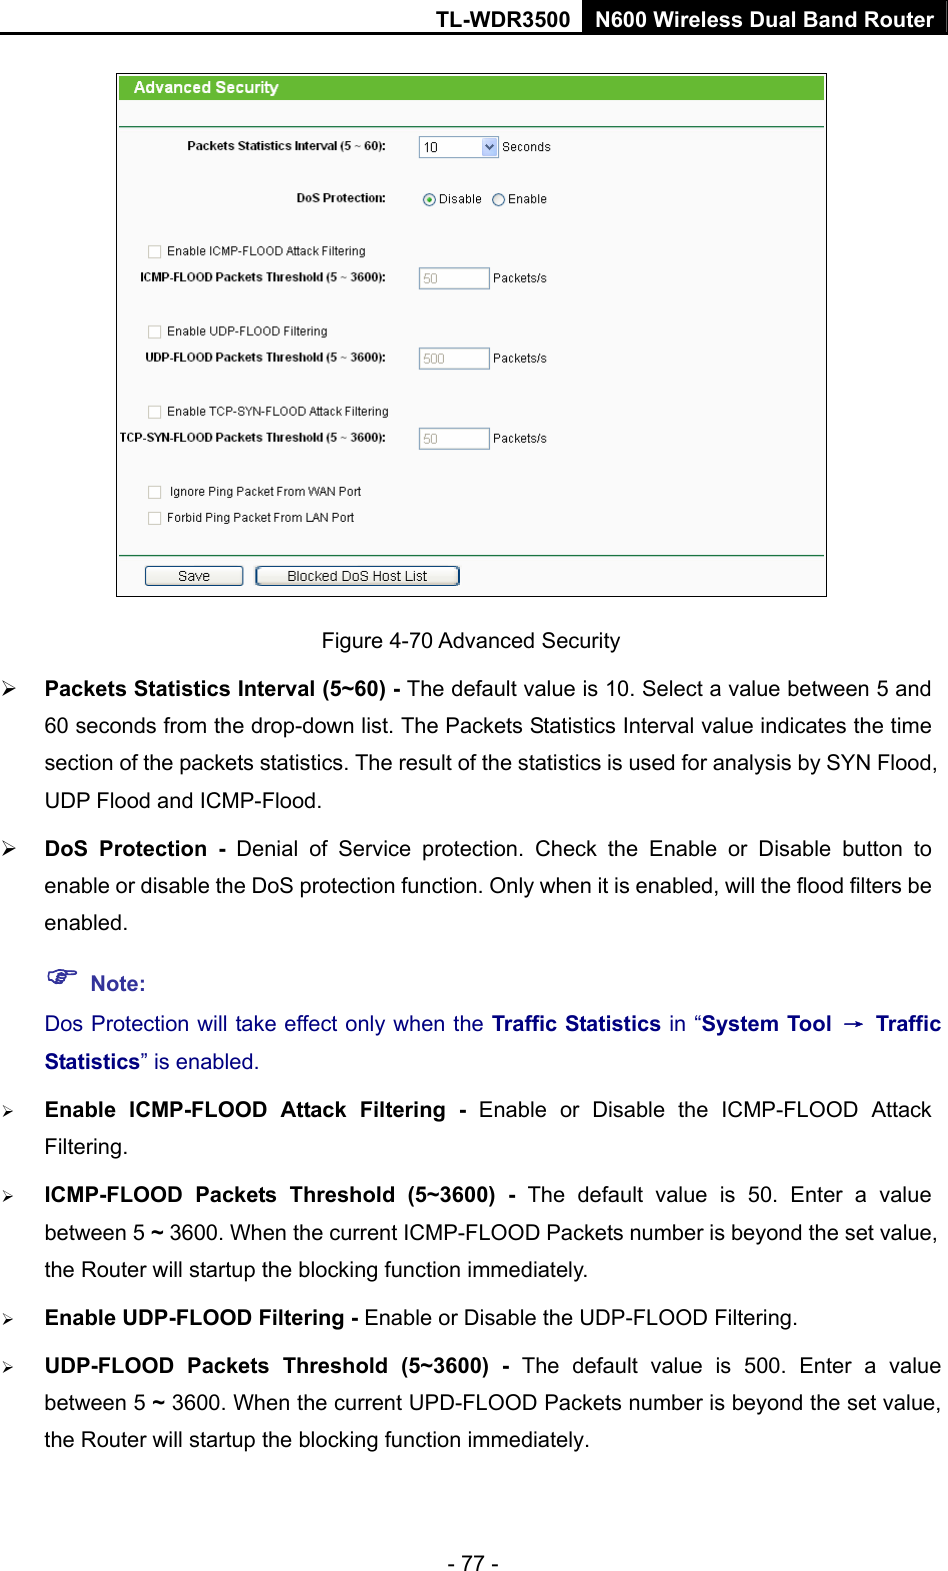 TL-WDR3500 N600 Wireless Dual Band Router - 77 -  Figure 4-70 Advanced Security  Packets Statistics Interval (5~60) - The default value is 10. Select a value between 5 and 60 seconds from the drop-down list. The Packets Statistics Interval value indicates the time section of the packets statistics. The result of the statistics is used for analysis by SYN Flood, UDP Flood and ICMP-Flood.  DoS Protection - Denial of Service protection. Check the Enable or Disable button to enable or disable the DoS protection function. Only when it is enabled, will the flood filters be enabled.  Note: Dos Protection will take effect only when the Traffic Statistics in “System Tool  → Traffic Statistics” is enabled.  Enable ICMP-FLOOD Attack Filtering - Enable or Disable the ICMP-FLOOD Attack Filtering.  ICMP-FLOOD Packets Threshold (5~3600) - The default value is 50. Enter a value between 5 ~ 3600. When the current ICMP-FLOOD Packets number is beyond the set value, the Router will startup the blocking function immediately.  Enable UDP-FLOOD Filtering - Enable or Disable the UDP-FLOOD Filtering.  UDP-FLOOD Packets Threshold (5~3600) - The default value is 500. Enter a value between 5 ~ 3600. When the current UPD-FLOOD Packets number is beyond the set value, the Router will startup the blocking function immediately. 